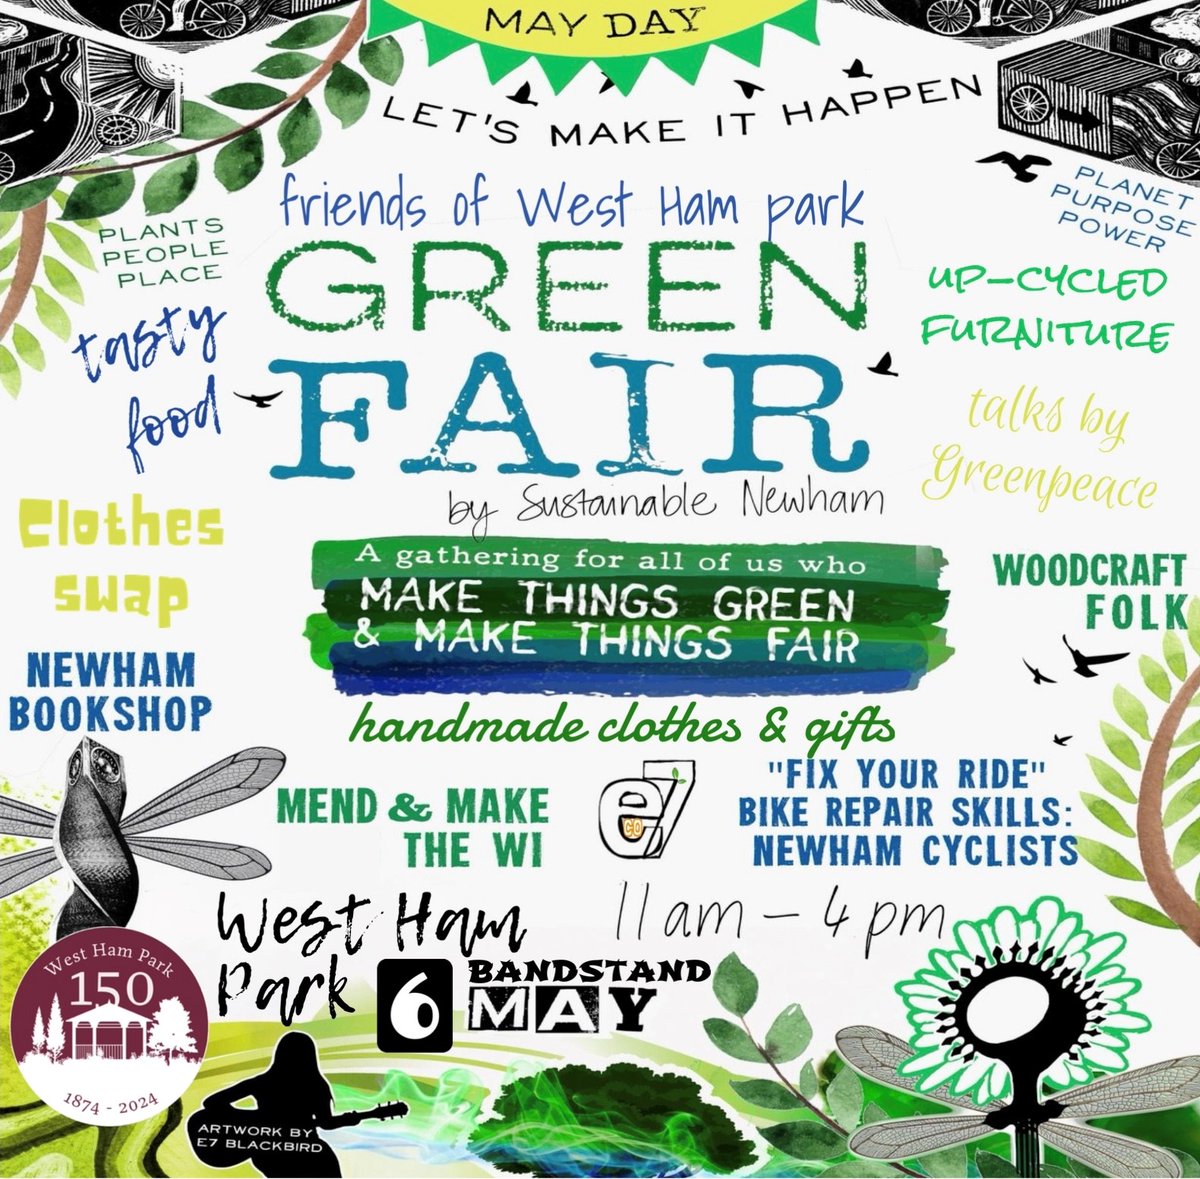 The Green Fair is coming to West Ham Park on Monday 6 May. Organised by @Sustainablenewham. All welcome to this free event from 11am -4pm around the bandstand. #WestHamPark150